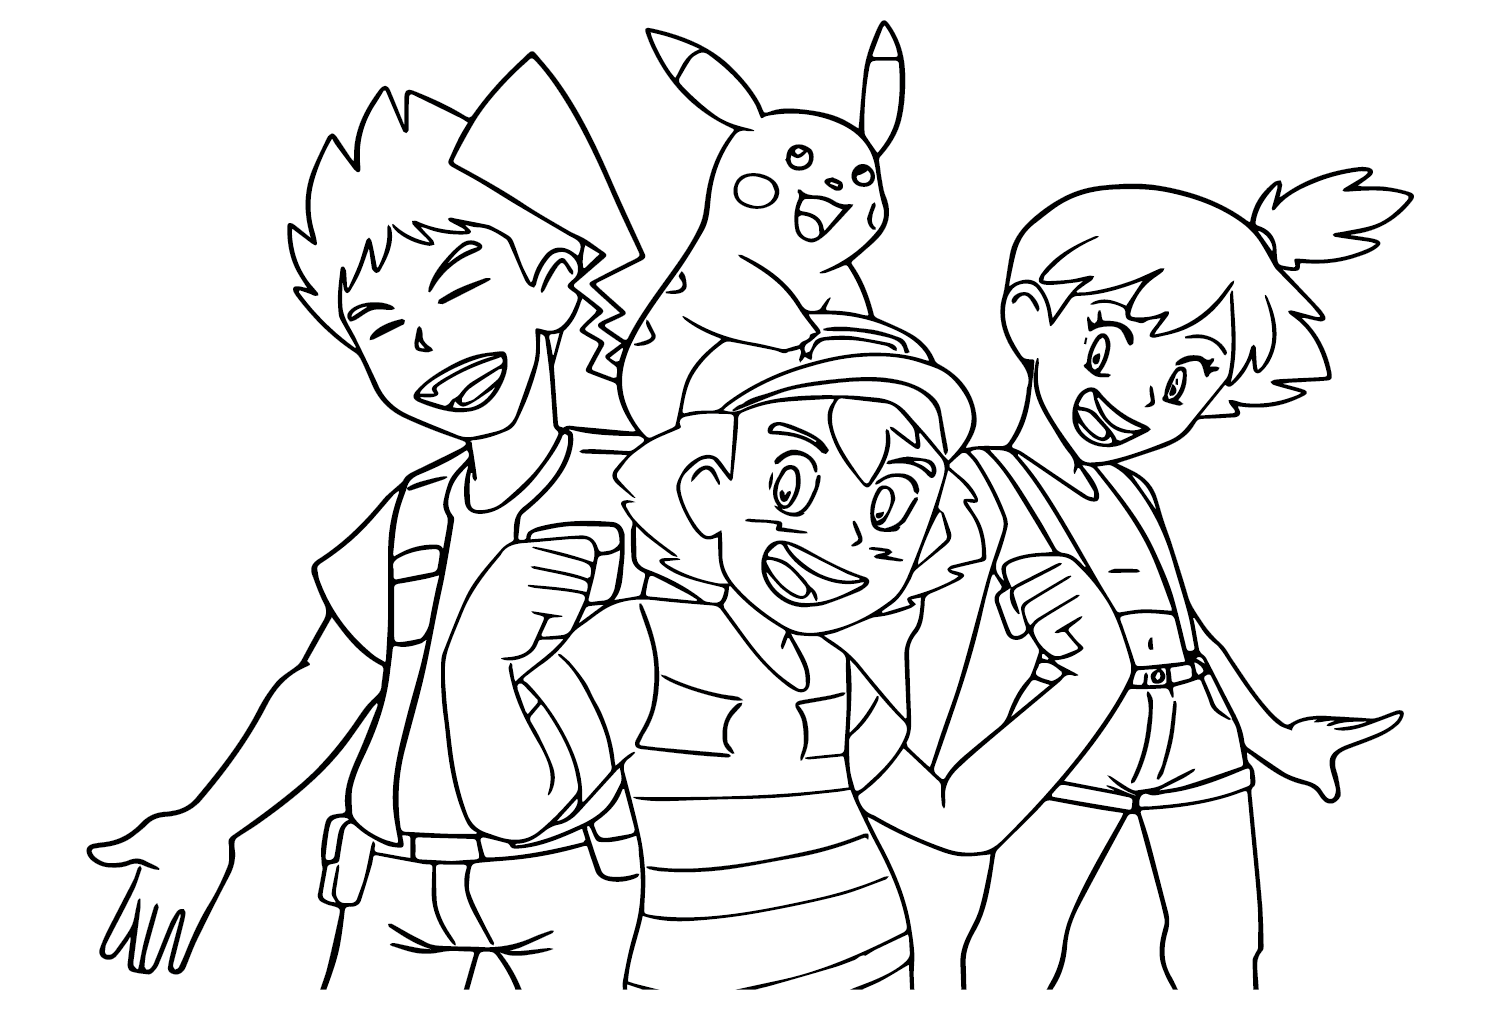 Ash, Brock and Misty Coloring Page from Ash Ketchum